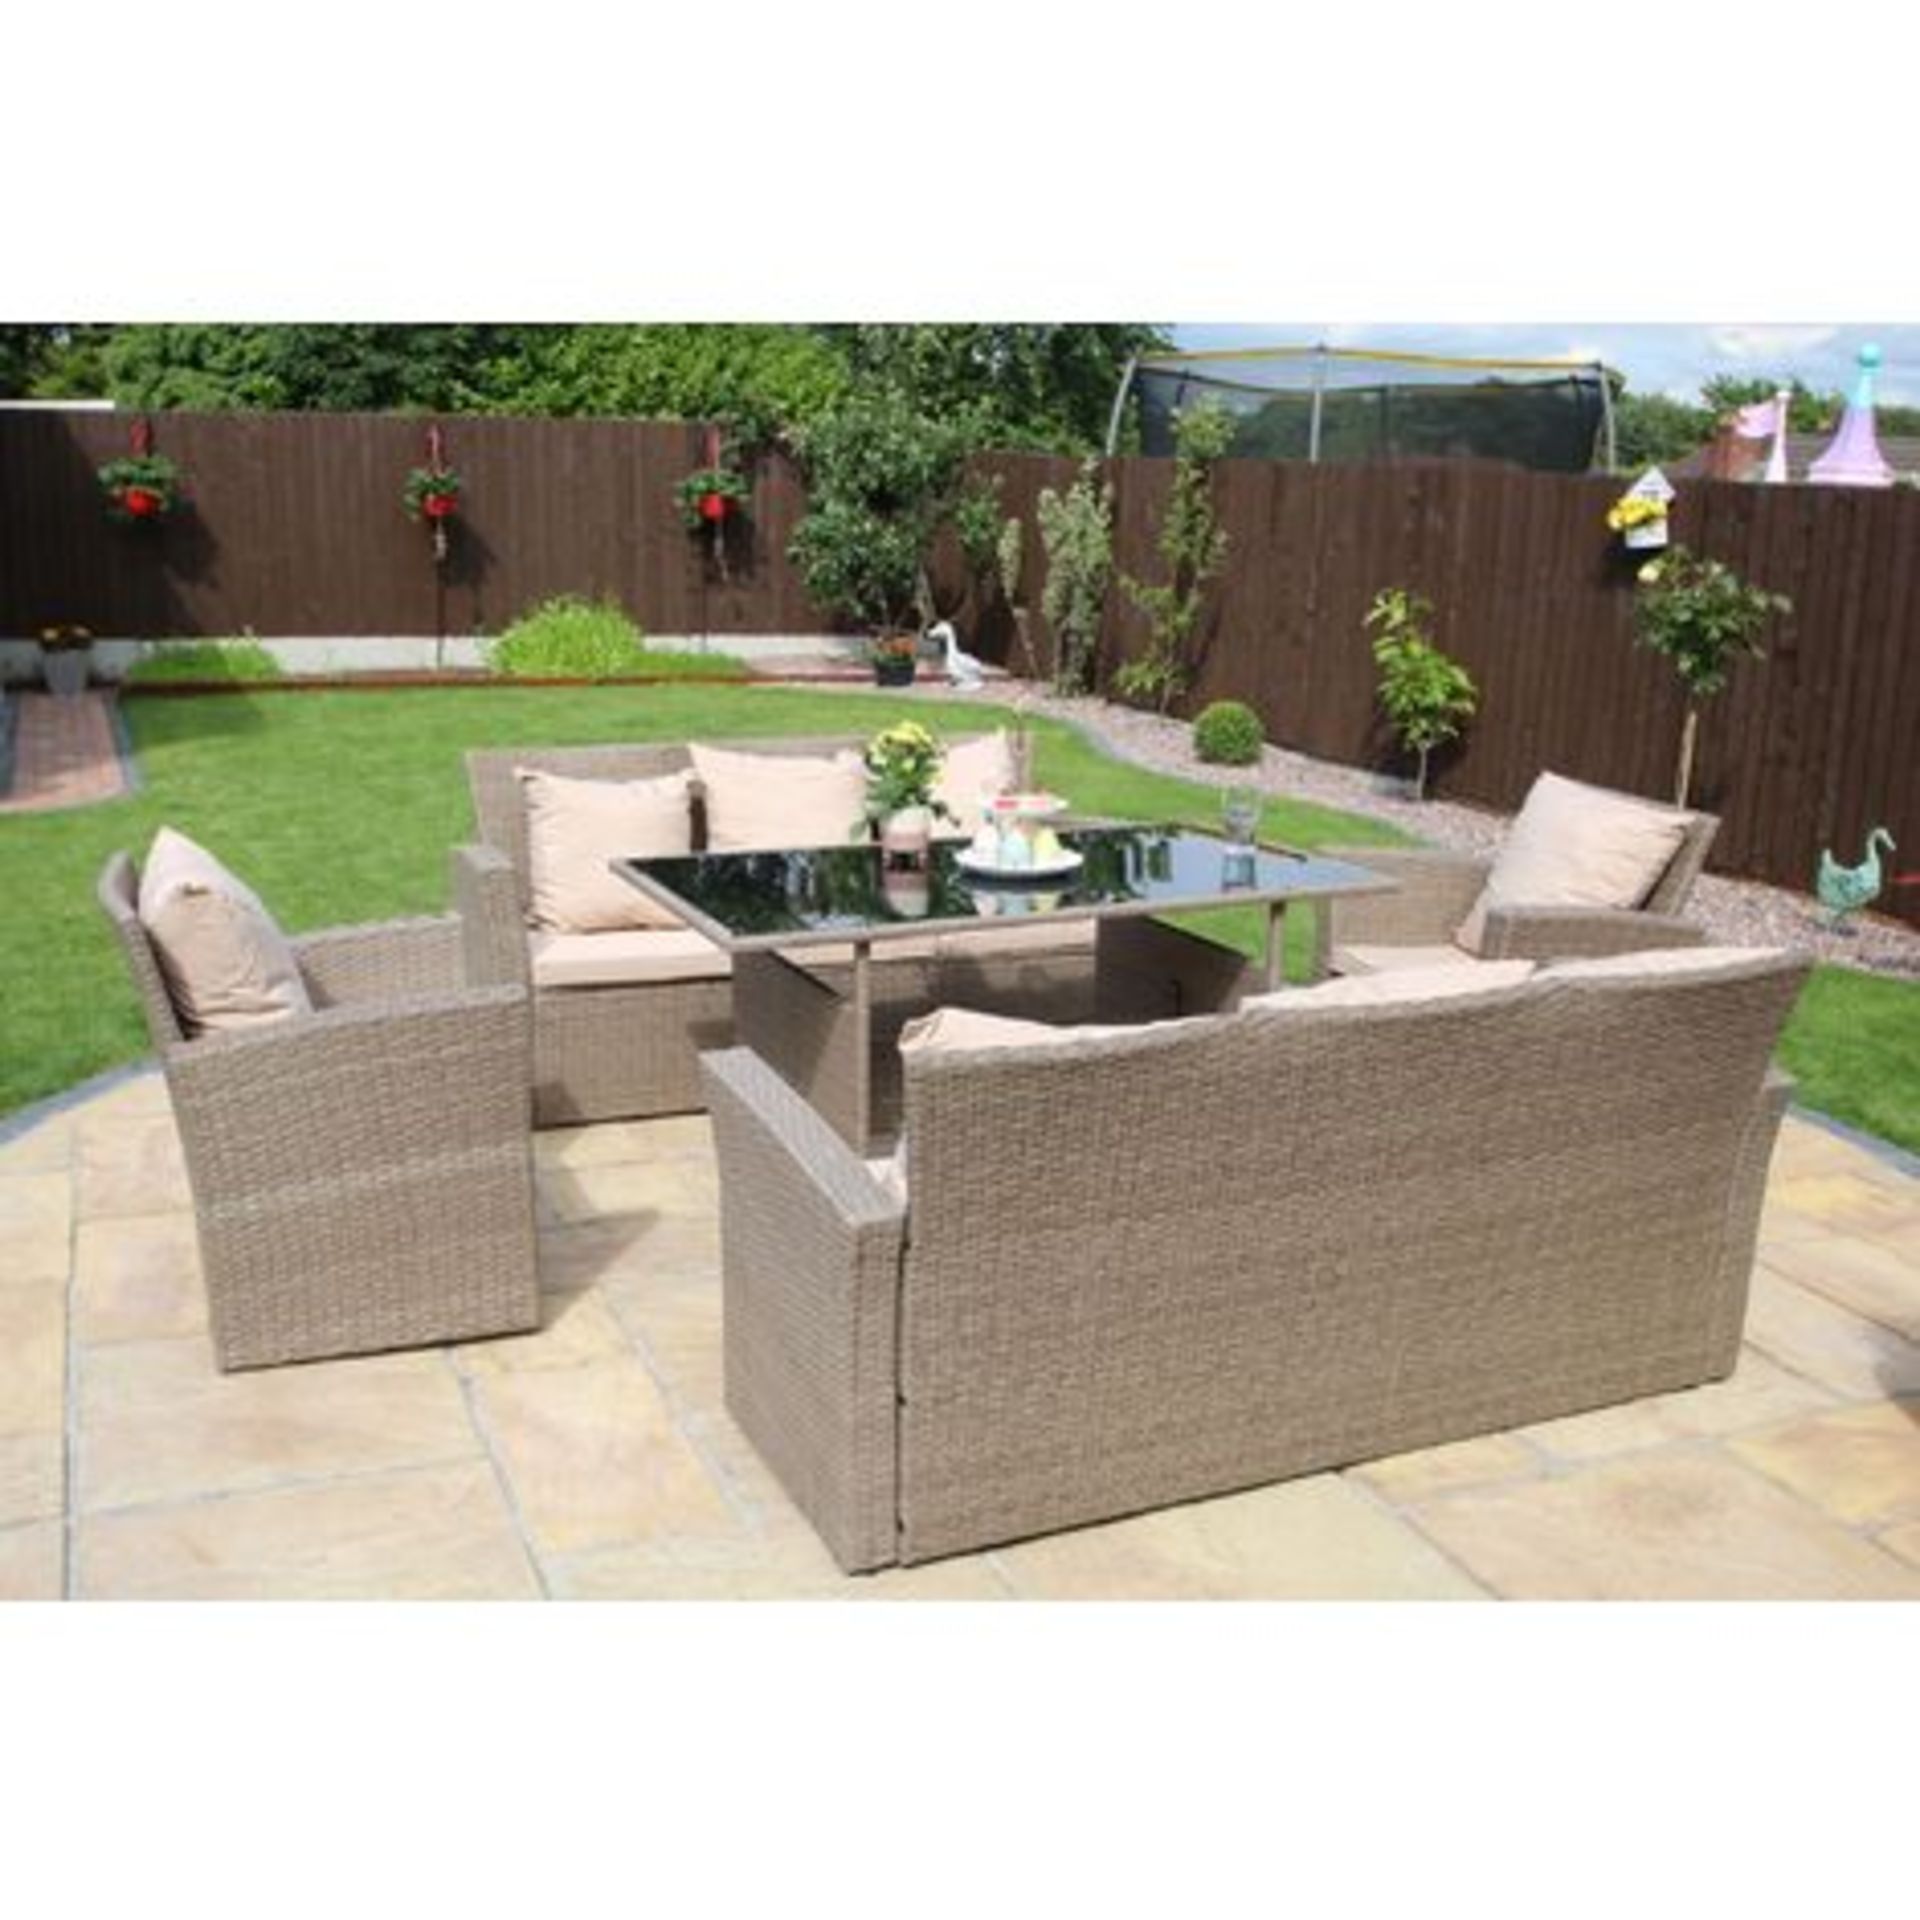 V Brand New 8 Seater Rattan Garden Dining Set Including 2 x Three Seater Sofas + 2 x Armchairs +